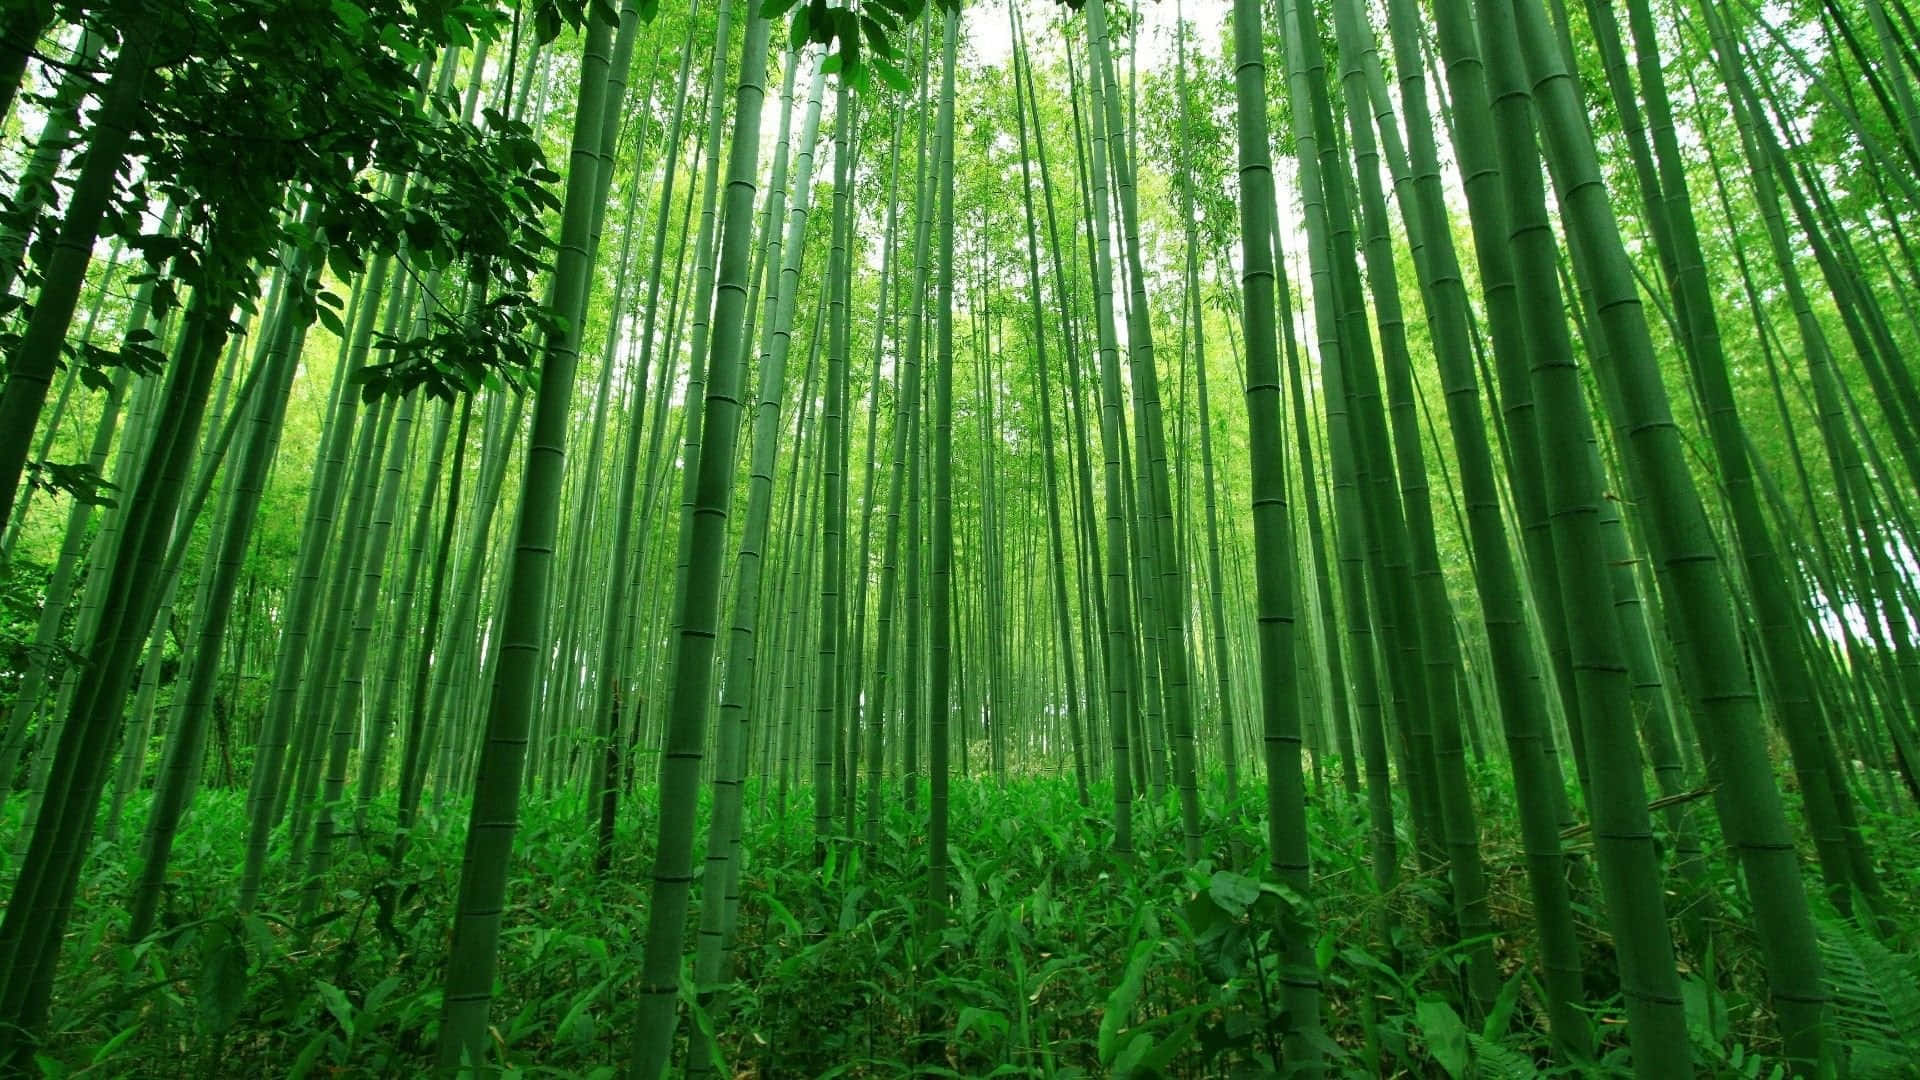 Wander through the peaceful beauty of a bamboo forest